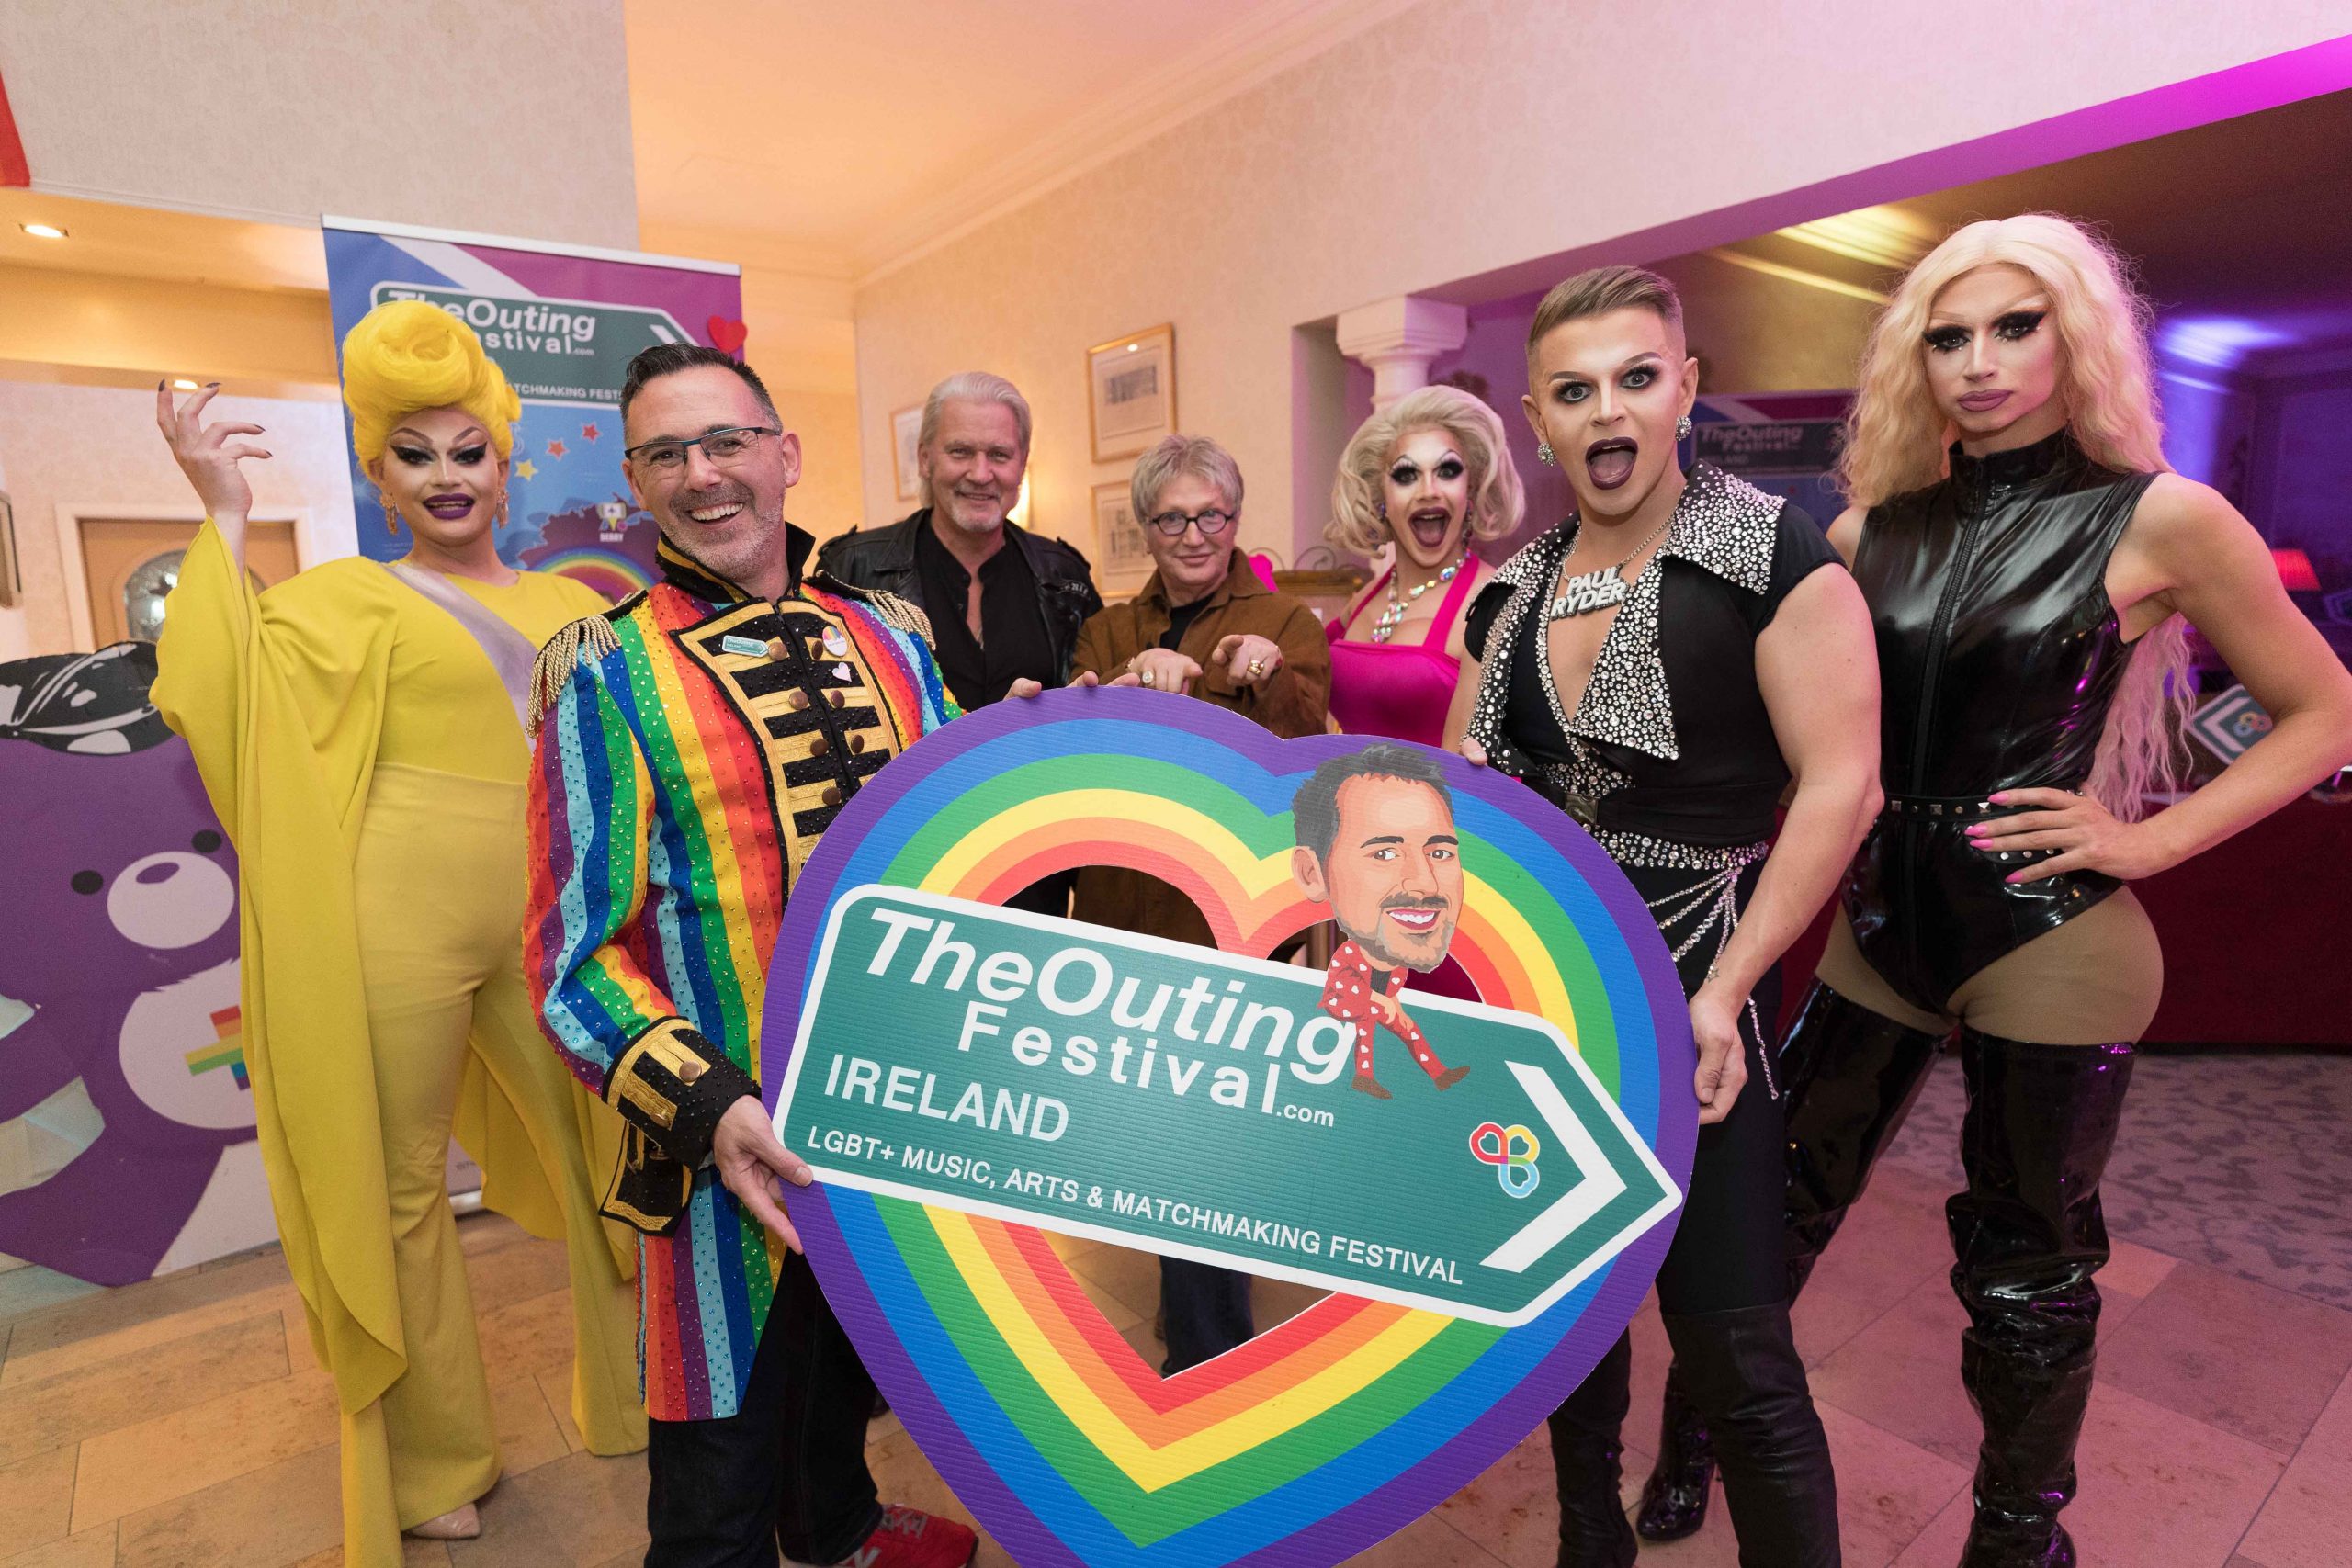 The Outing Festival 2023 takes place Valentine’s Weekend at The Inn at Dromoland